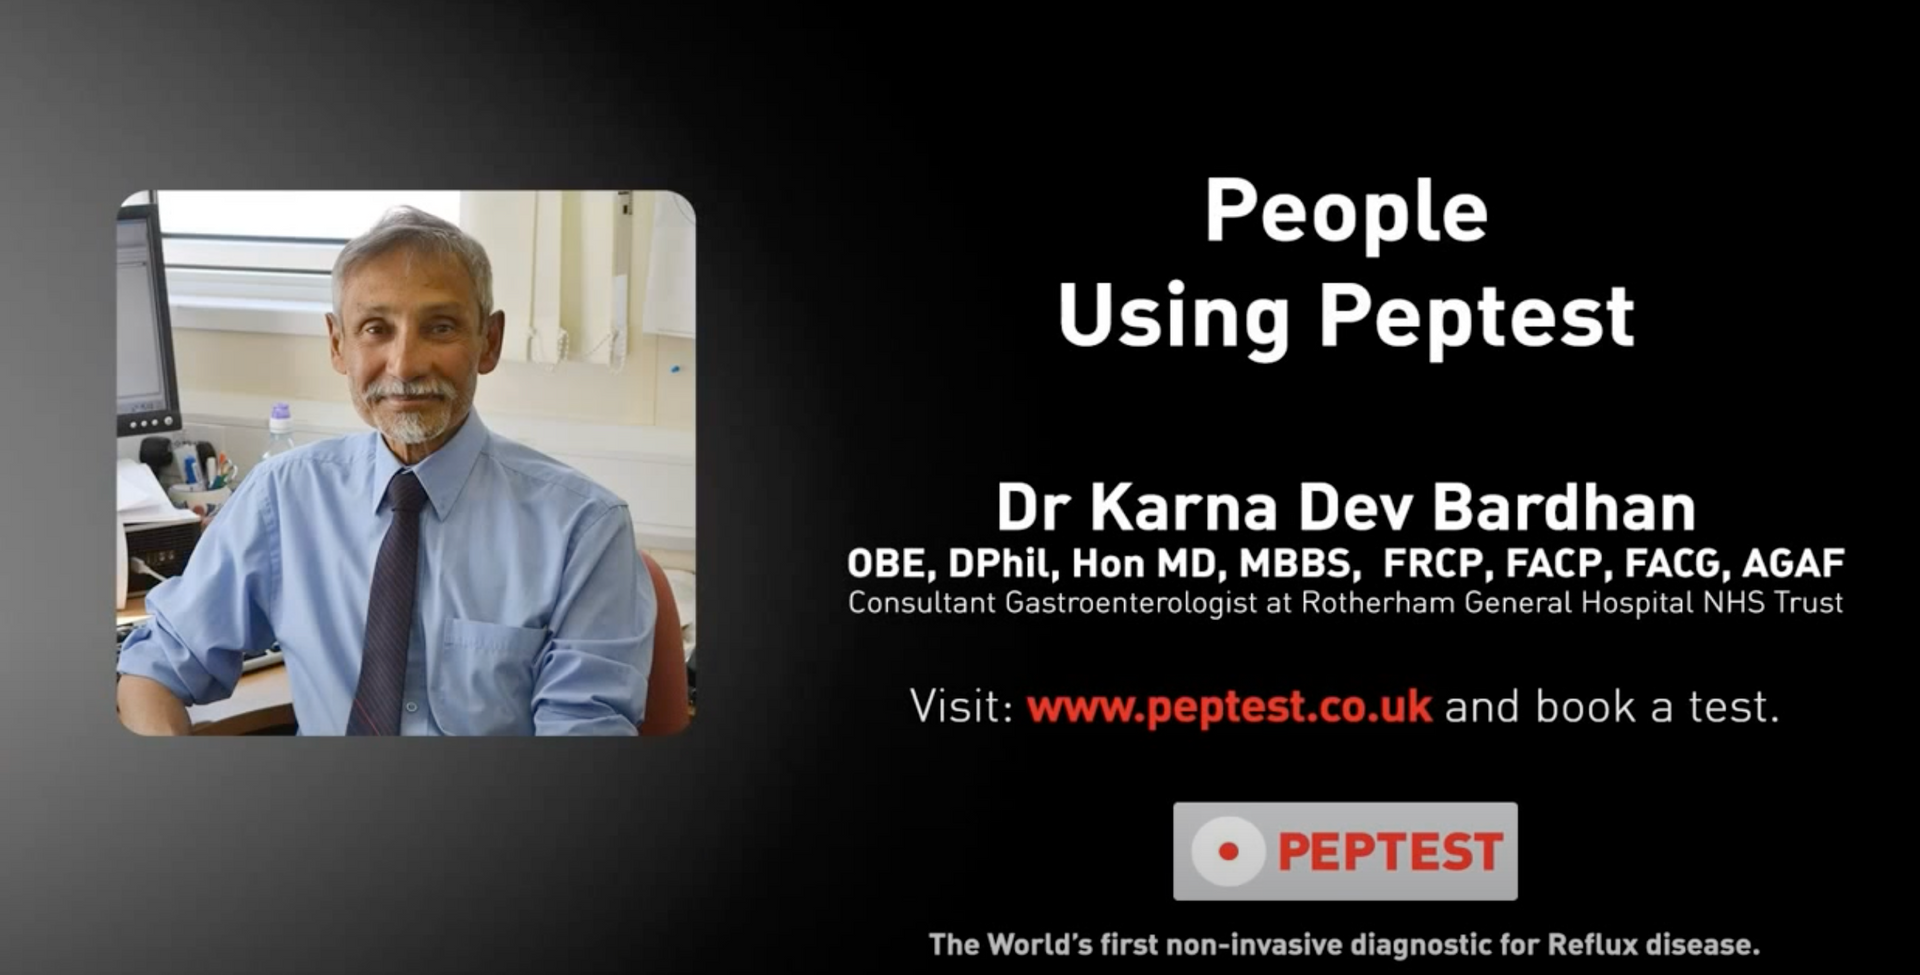 Load video: Prof Karna Dev BardhanProf Karna Dev Bardhan, Consultant Physician and Gastroenterologist at Rotherham General Hospital uses Peptest for research intoextraoesophageal reflux and other reflux associated conditions “Many patients present with throat symptoms. Peptest results help me identify those in whom extraoesophageal reflux contributes.”